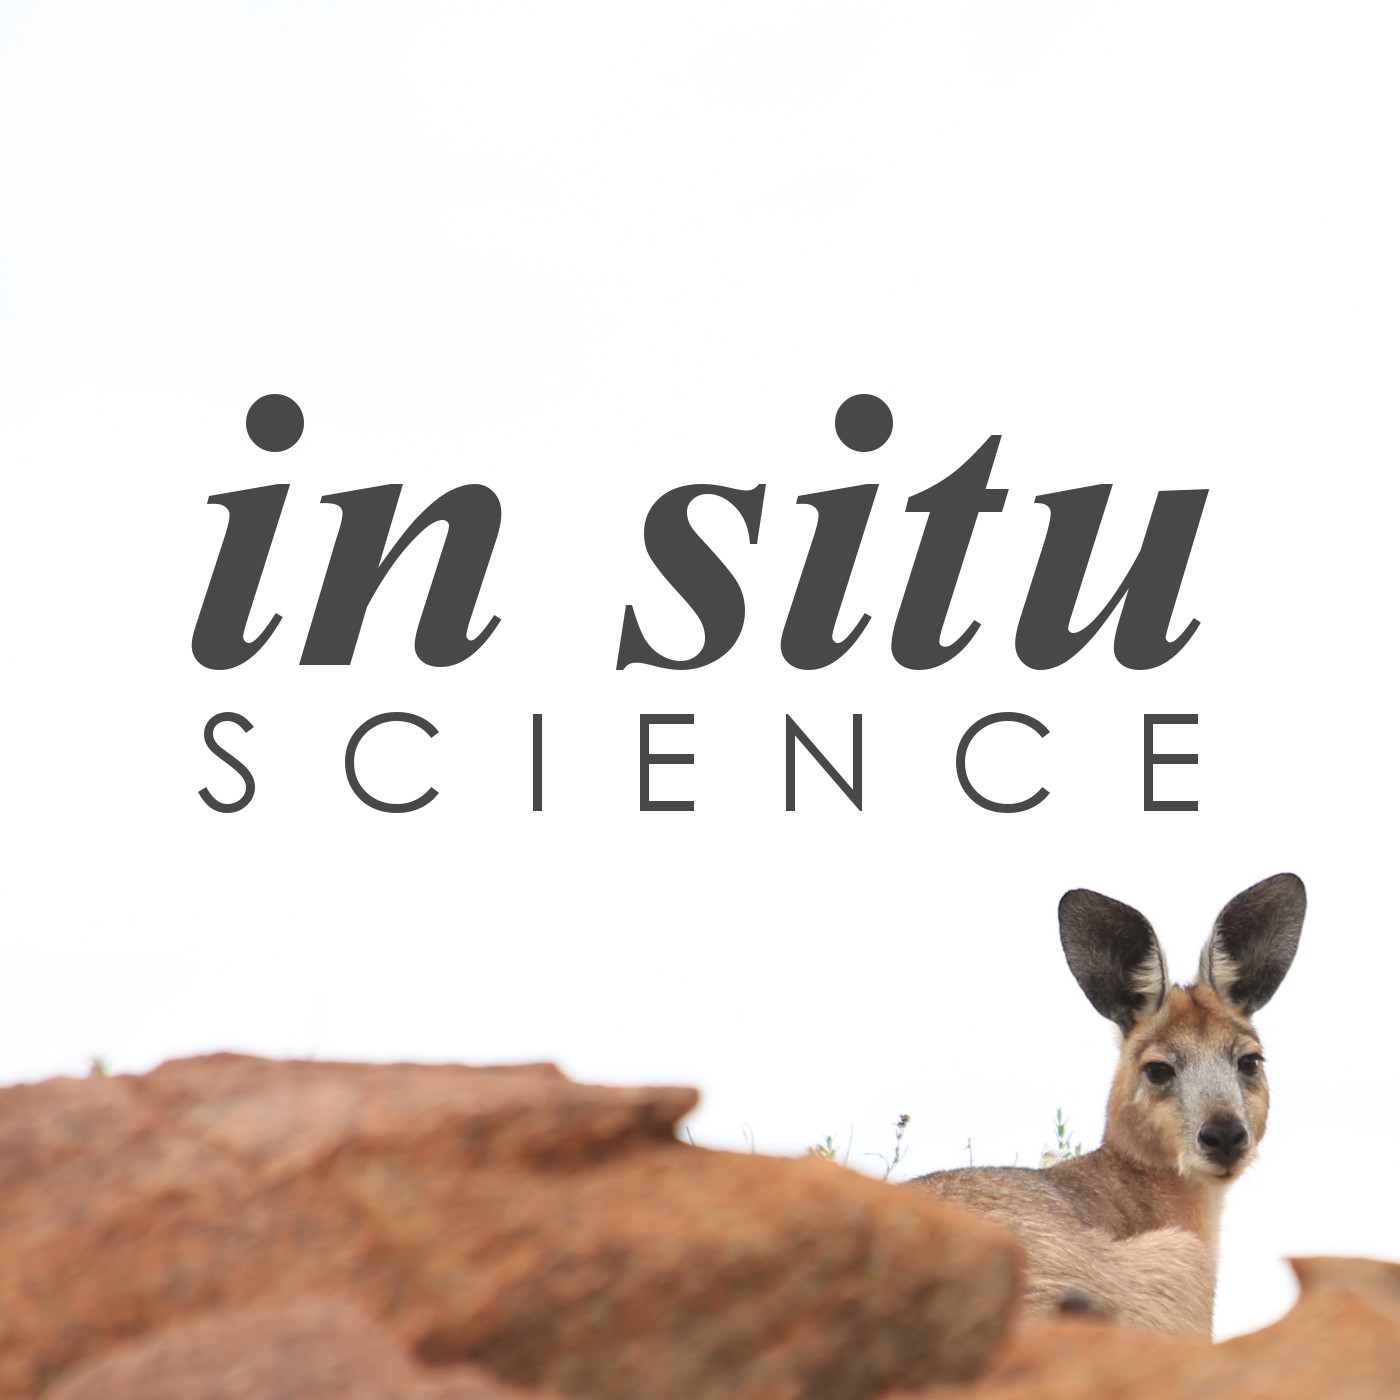 Ep 35. Microbats, bushfires and learning Norwegian with Clare Stawski